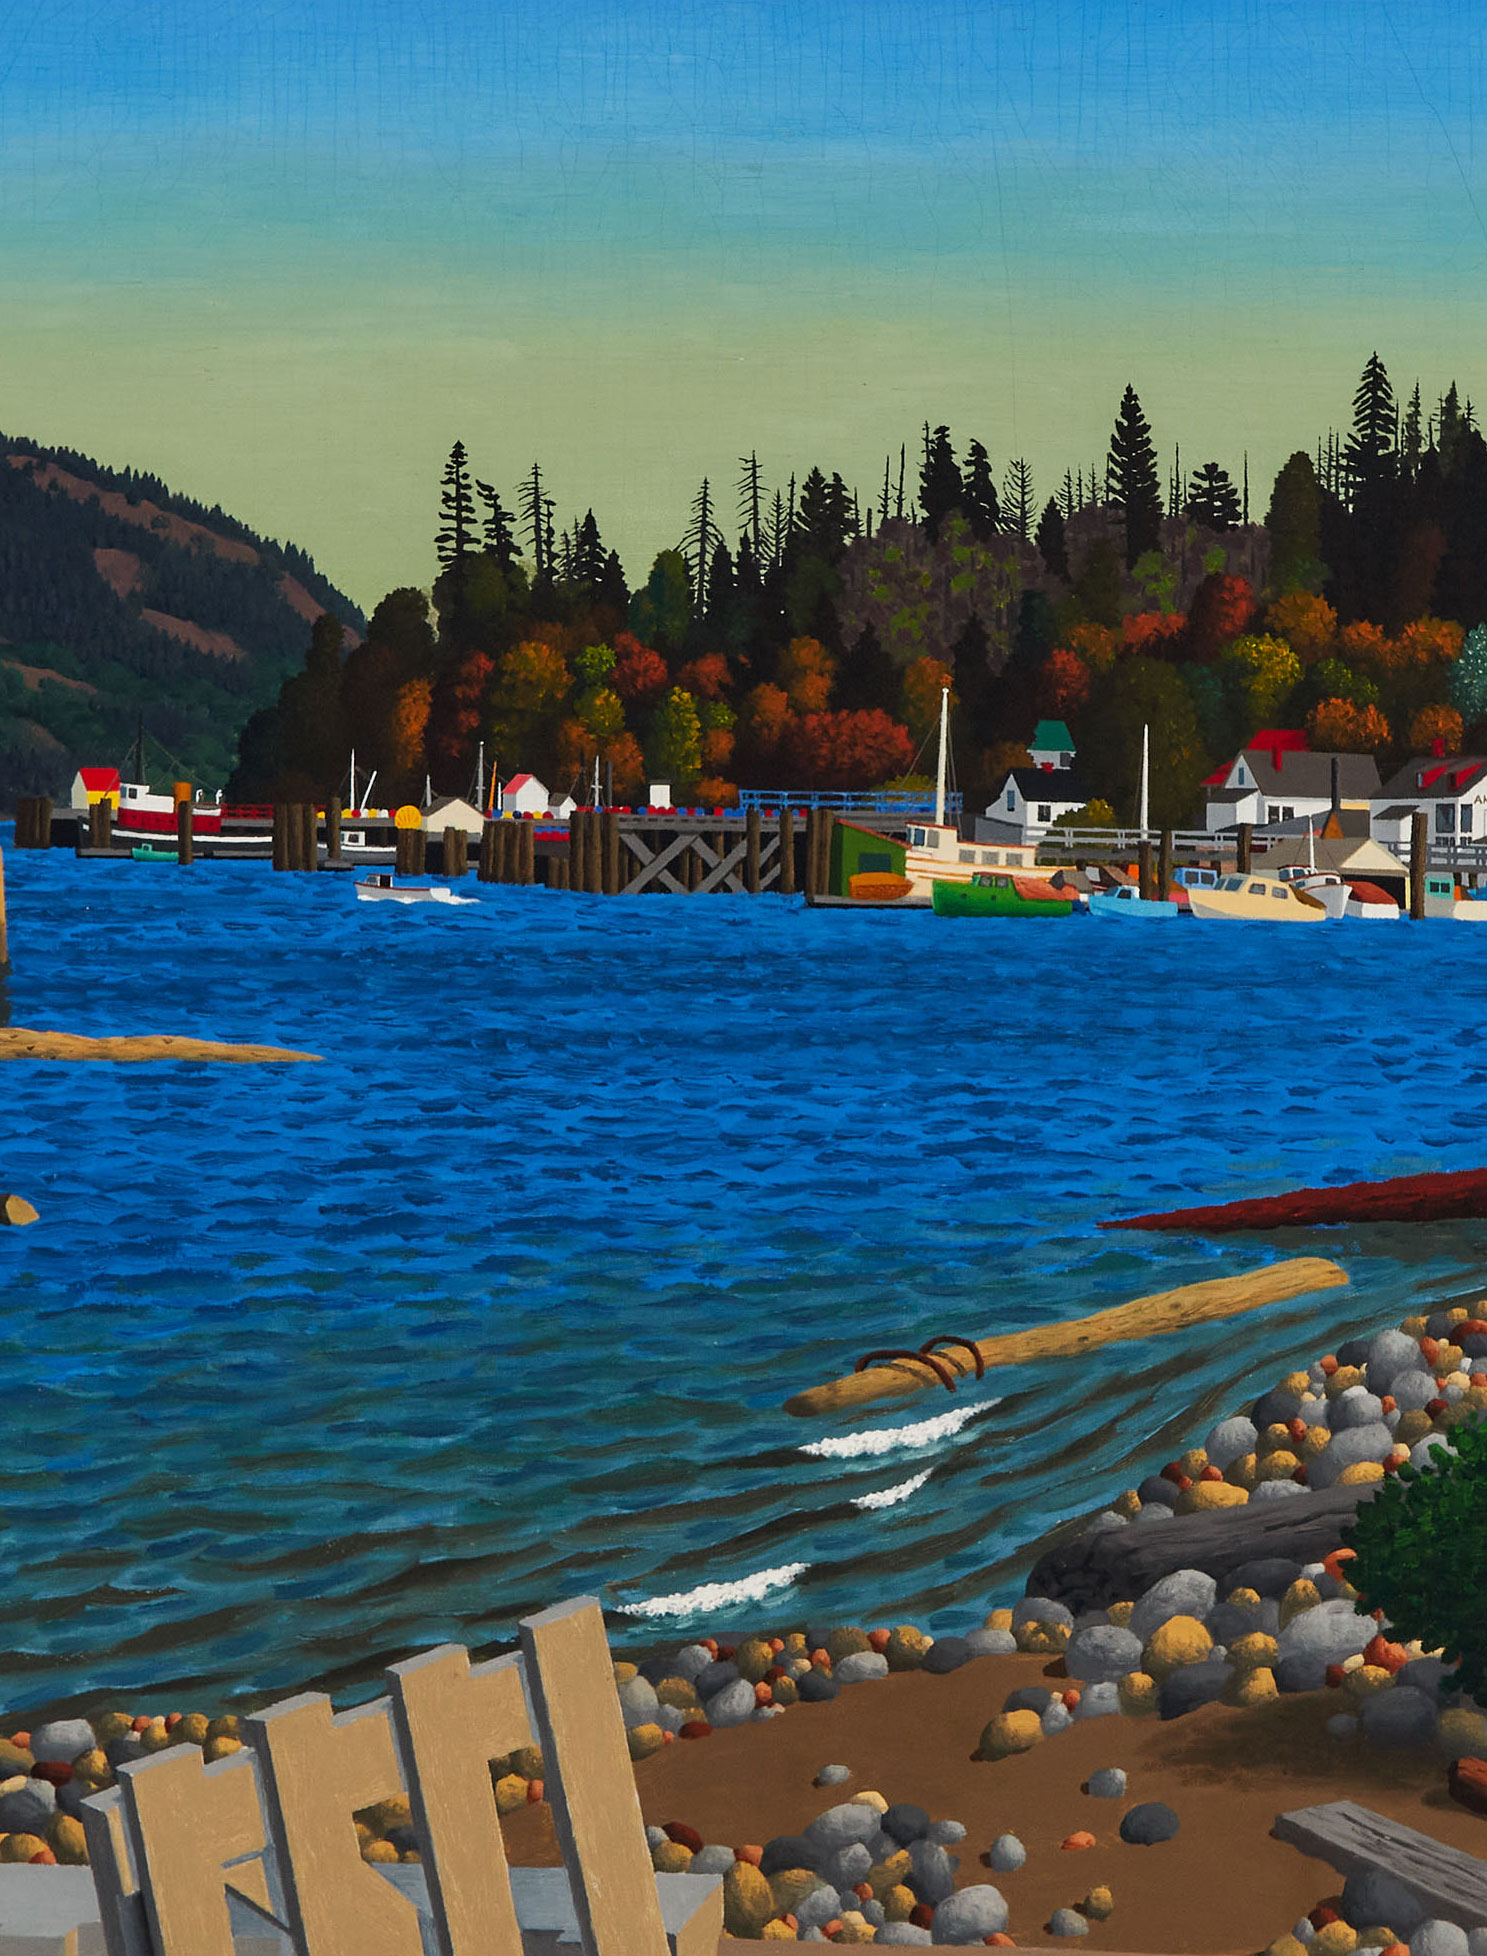 "The Waterfront at Cowichan Bay" by E.J. Hughes